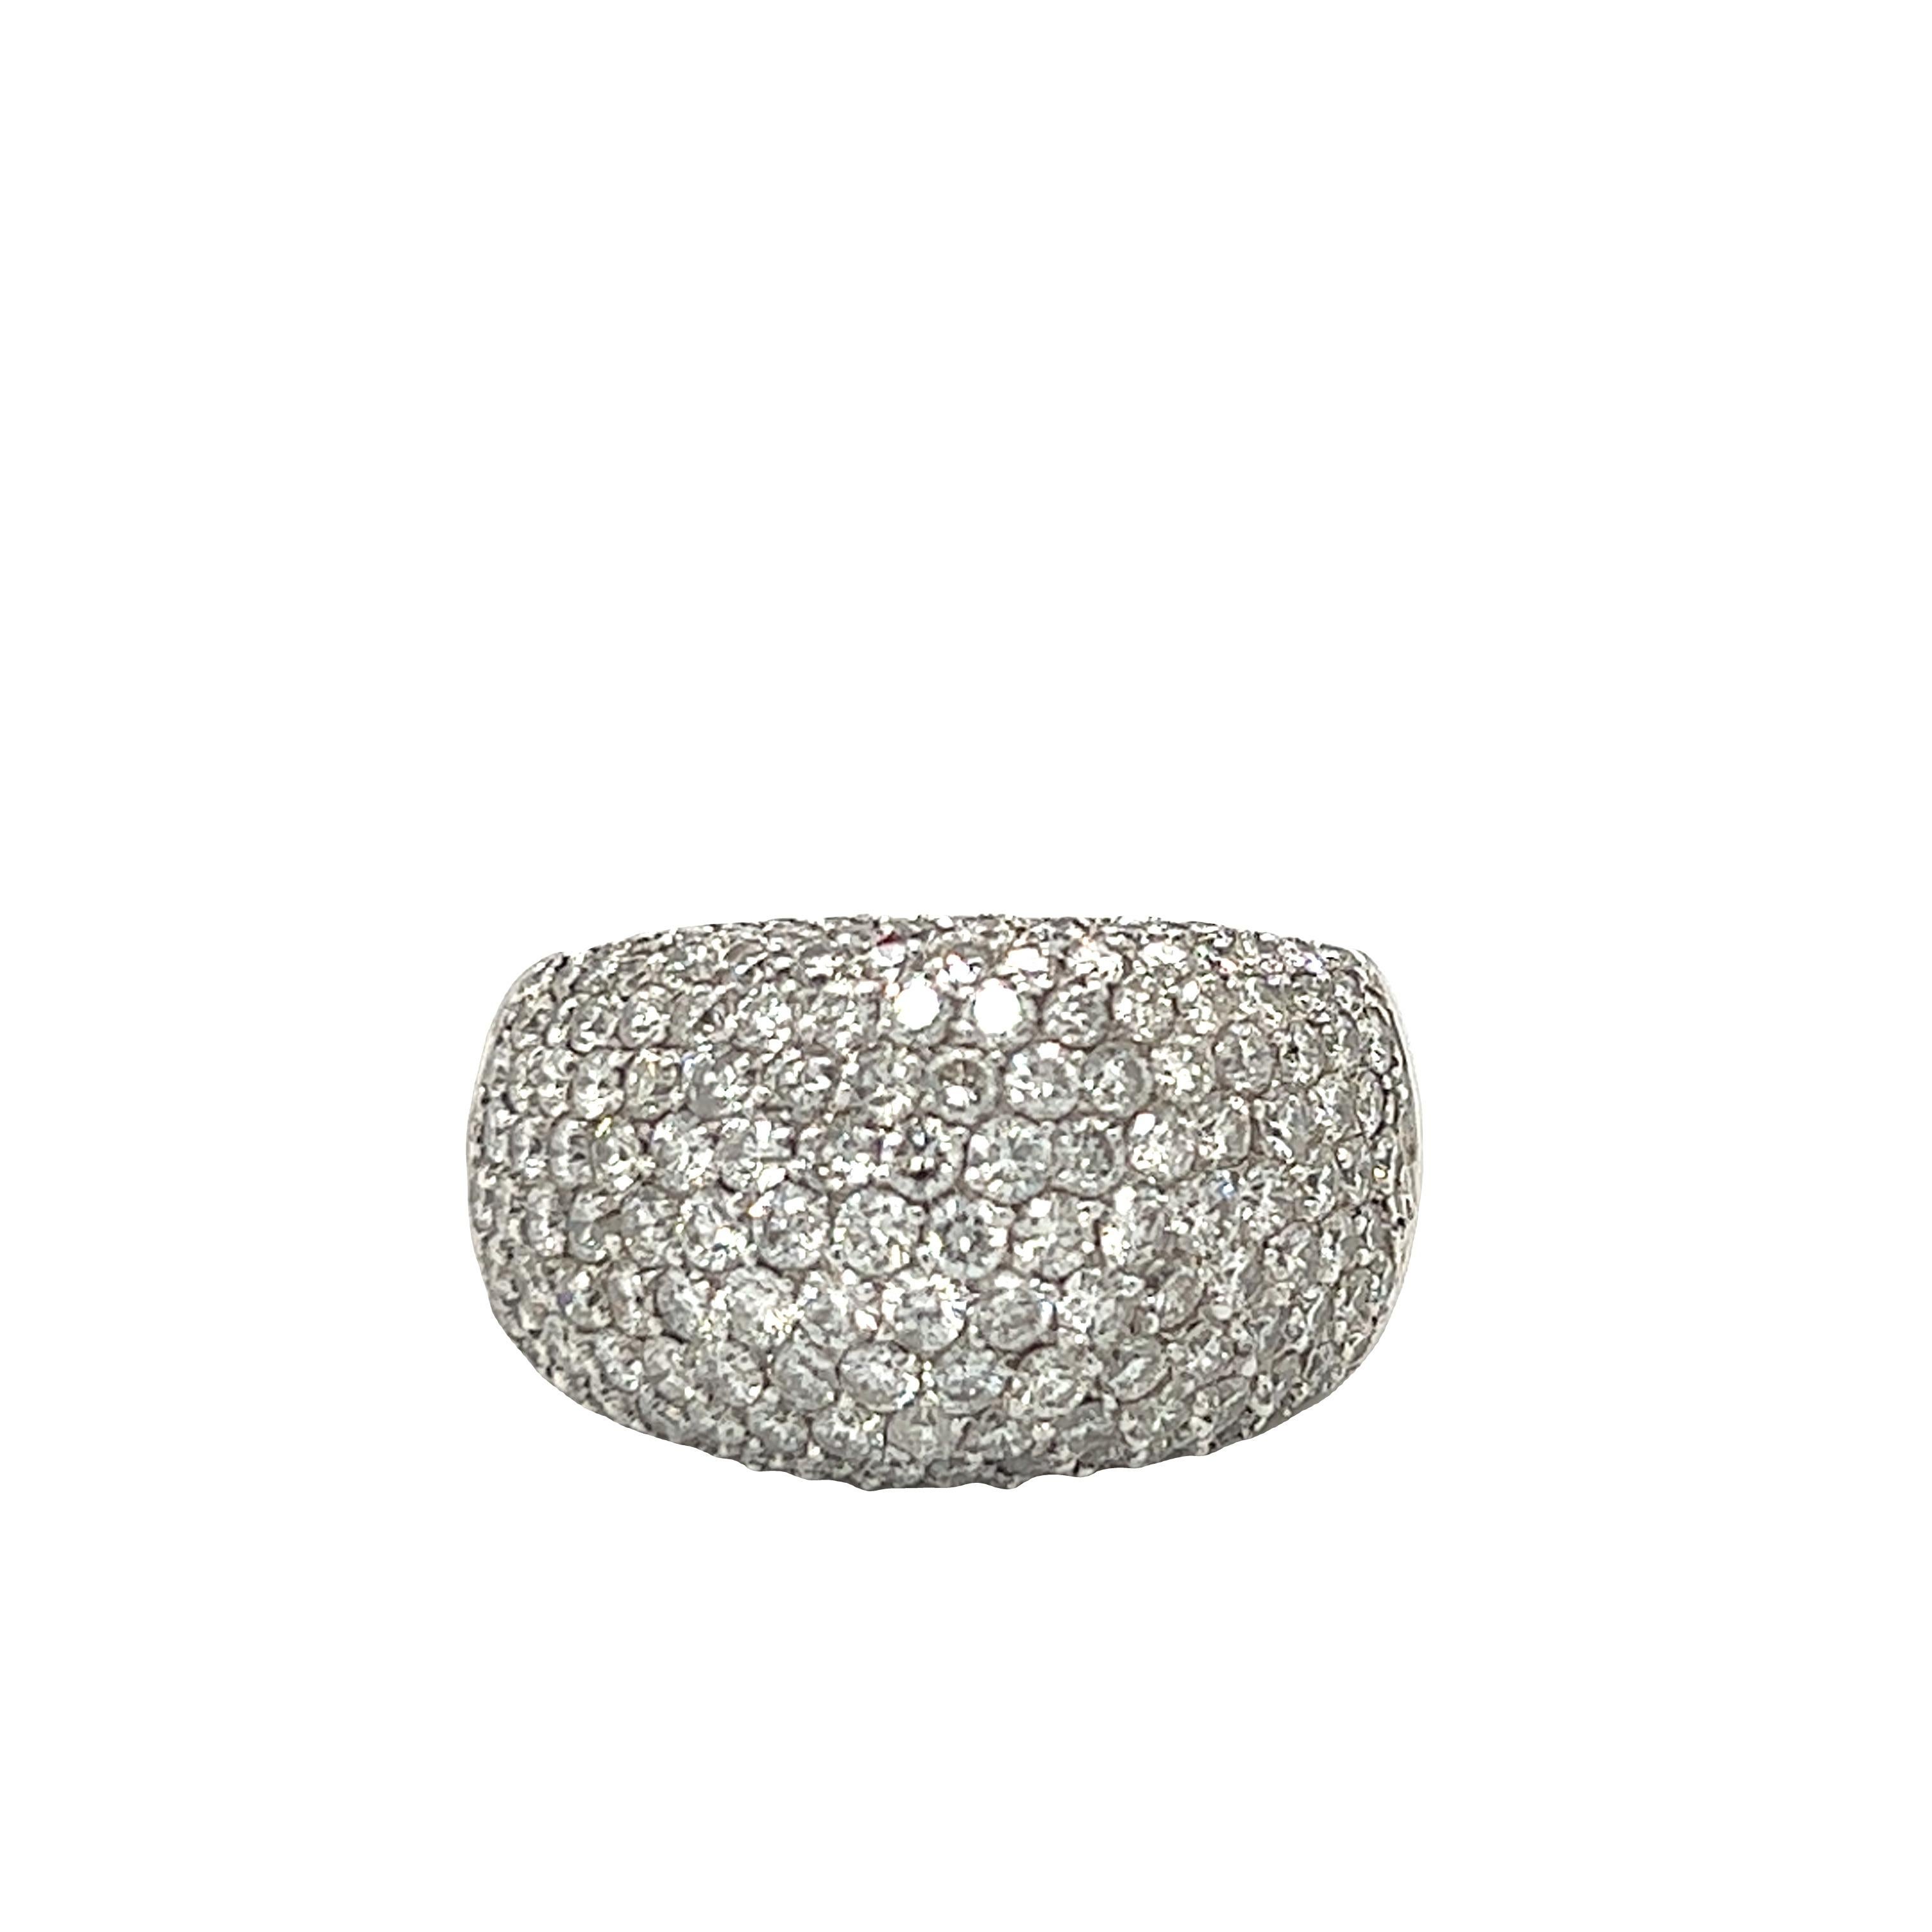 Gorgeously sparkling cocktail ring features 5 carats of round brilliant diamonds pave-set in luxurious 18k white god. Resizable.

Ring size: 8
Metal: 18K White Gold
Weight: 12.2 grams
Diamond color: G
Diamond clarity: VS
Width: 13 mm
Height: 6.1